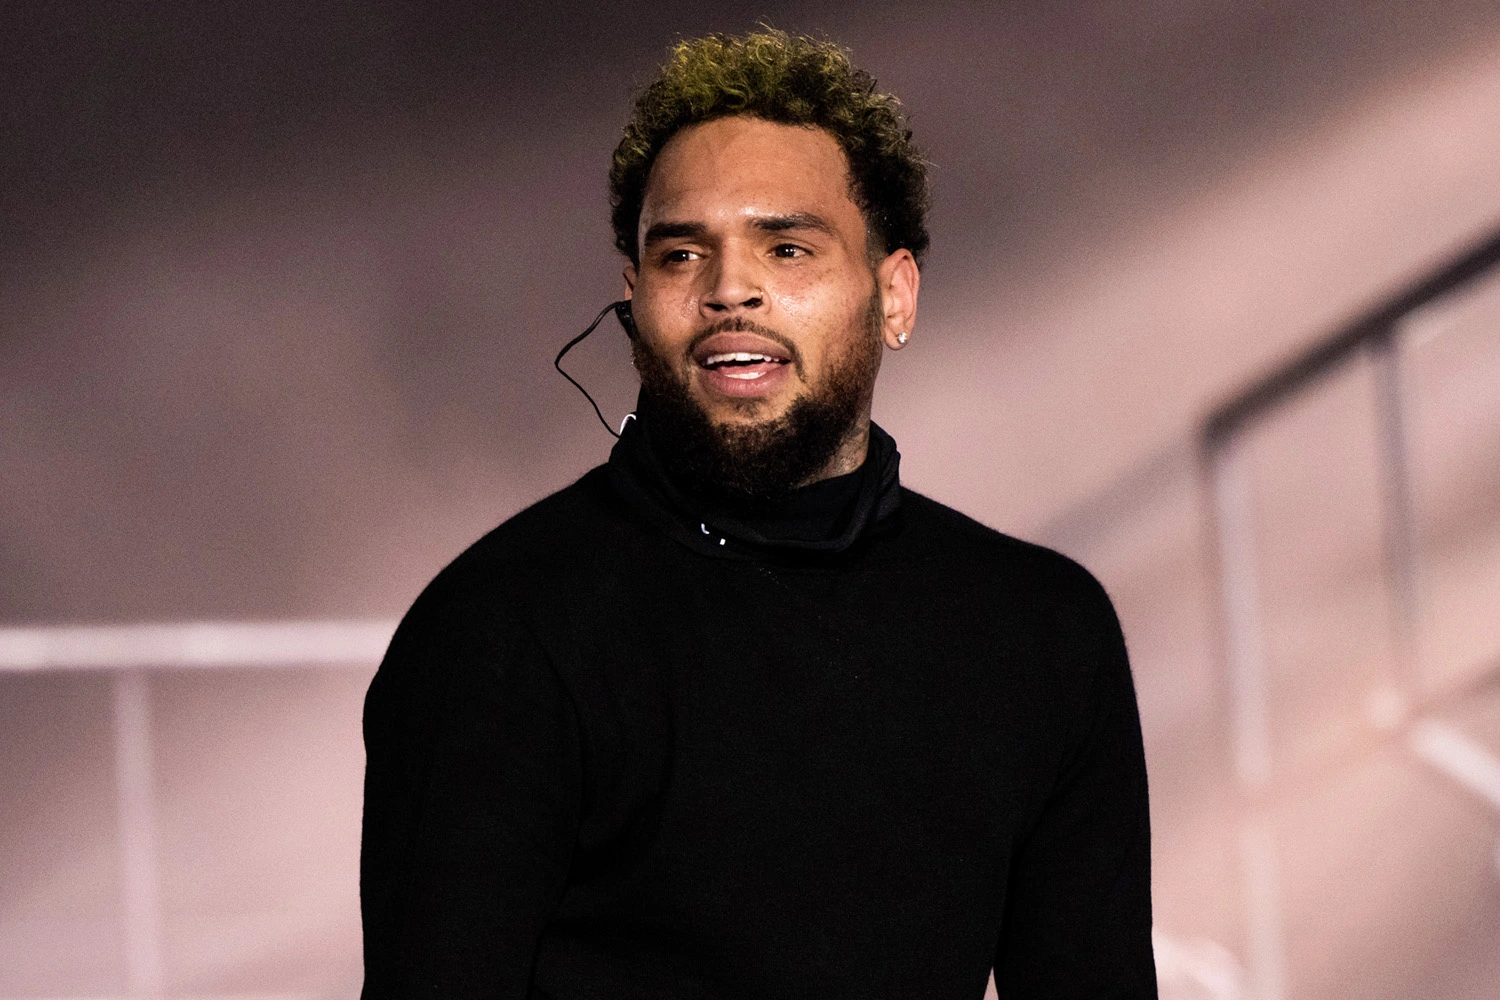 Chris Brown reportedly charging hefty price for meet and greet pics